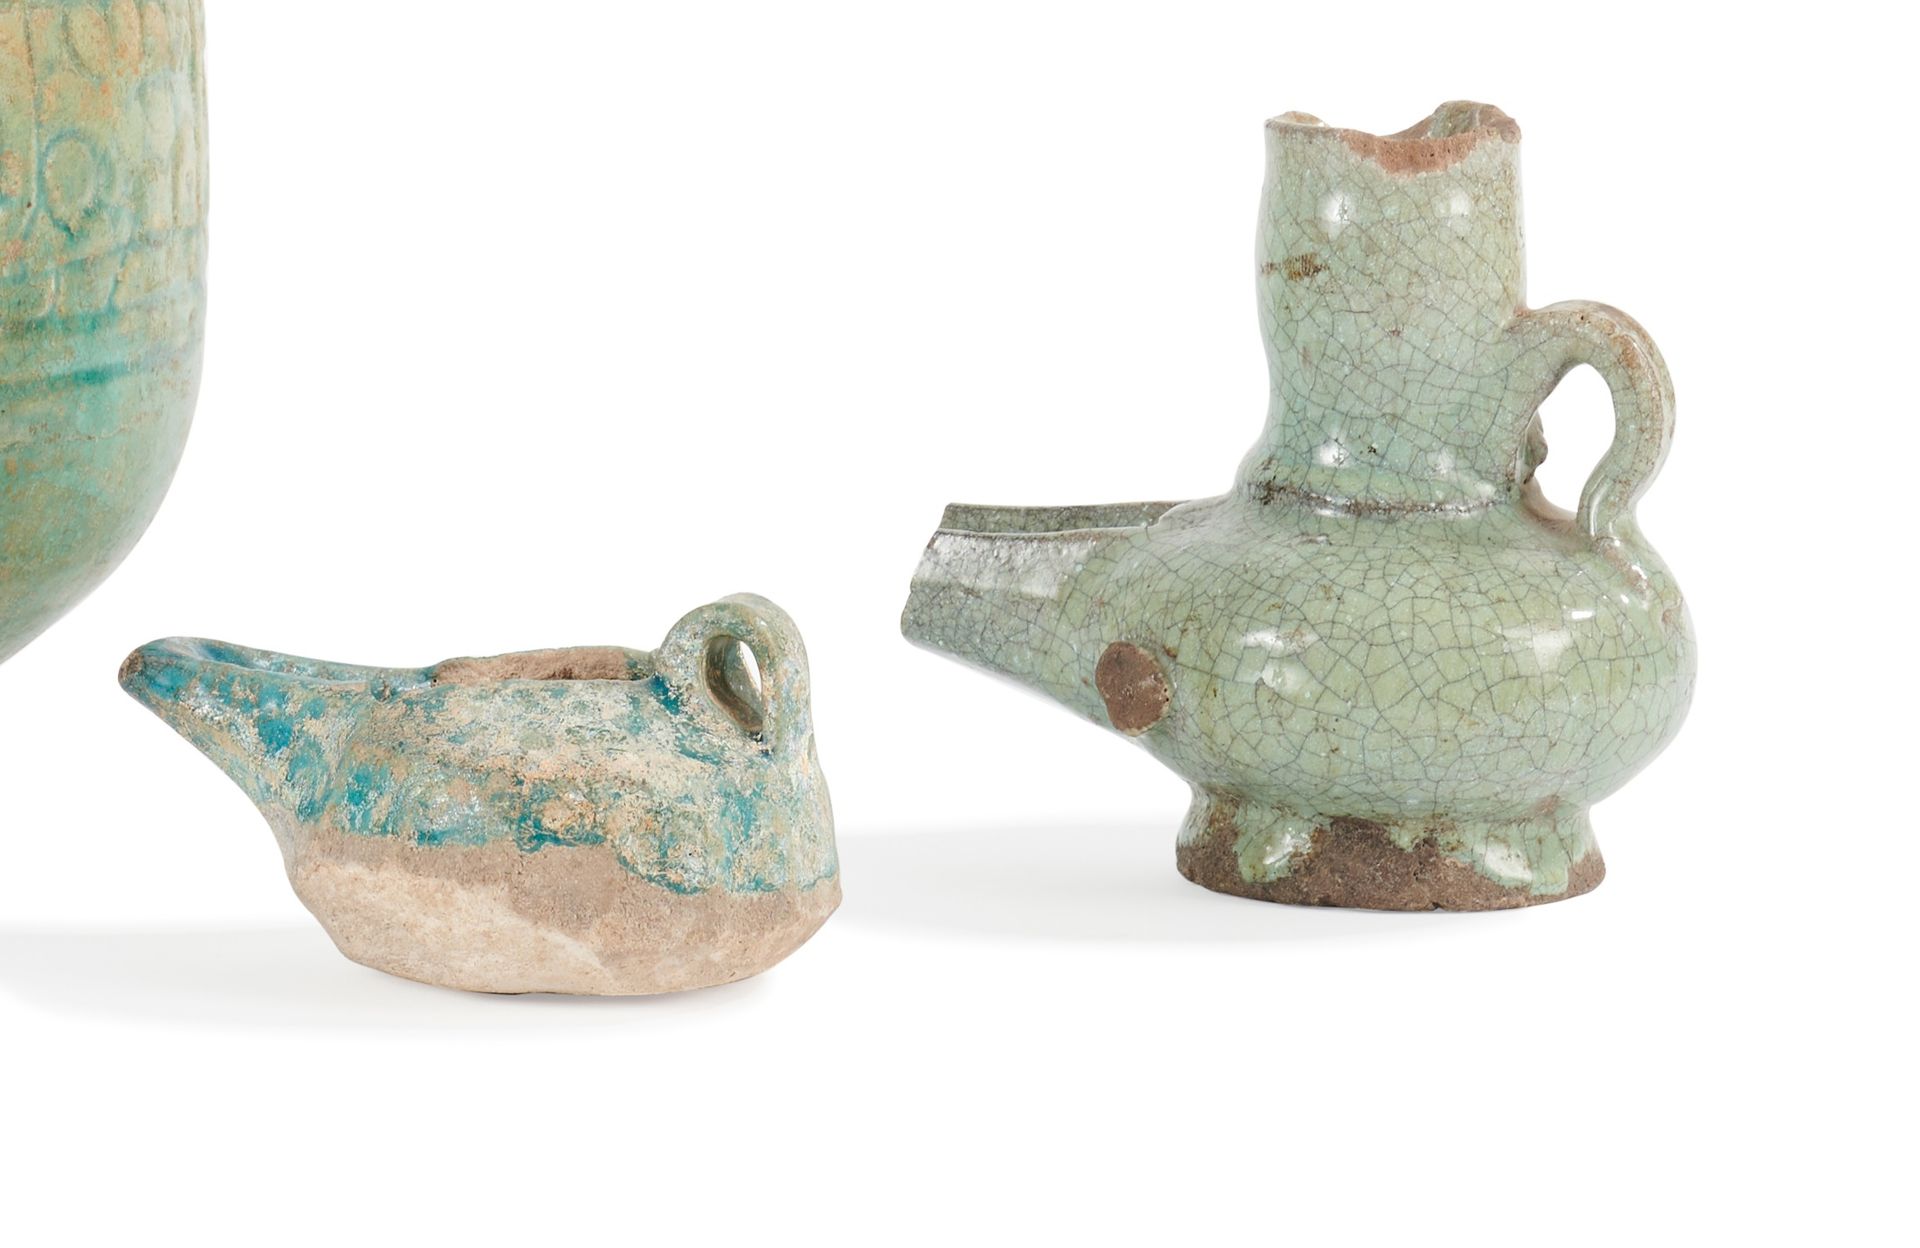 Null Two turquoise-glazed oil lamps, Syria and Iran, 12th-13th century
In turquo&hellip;